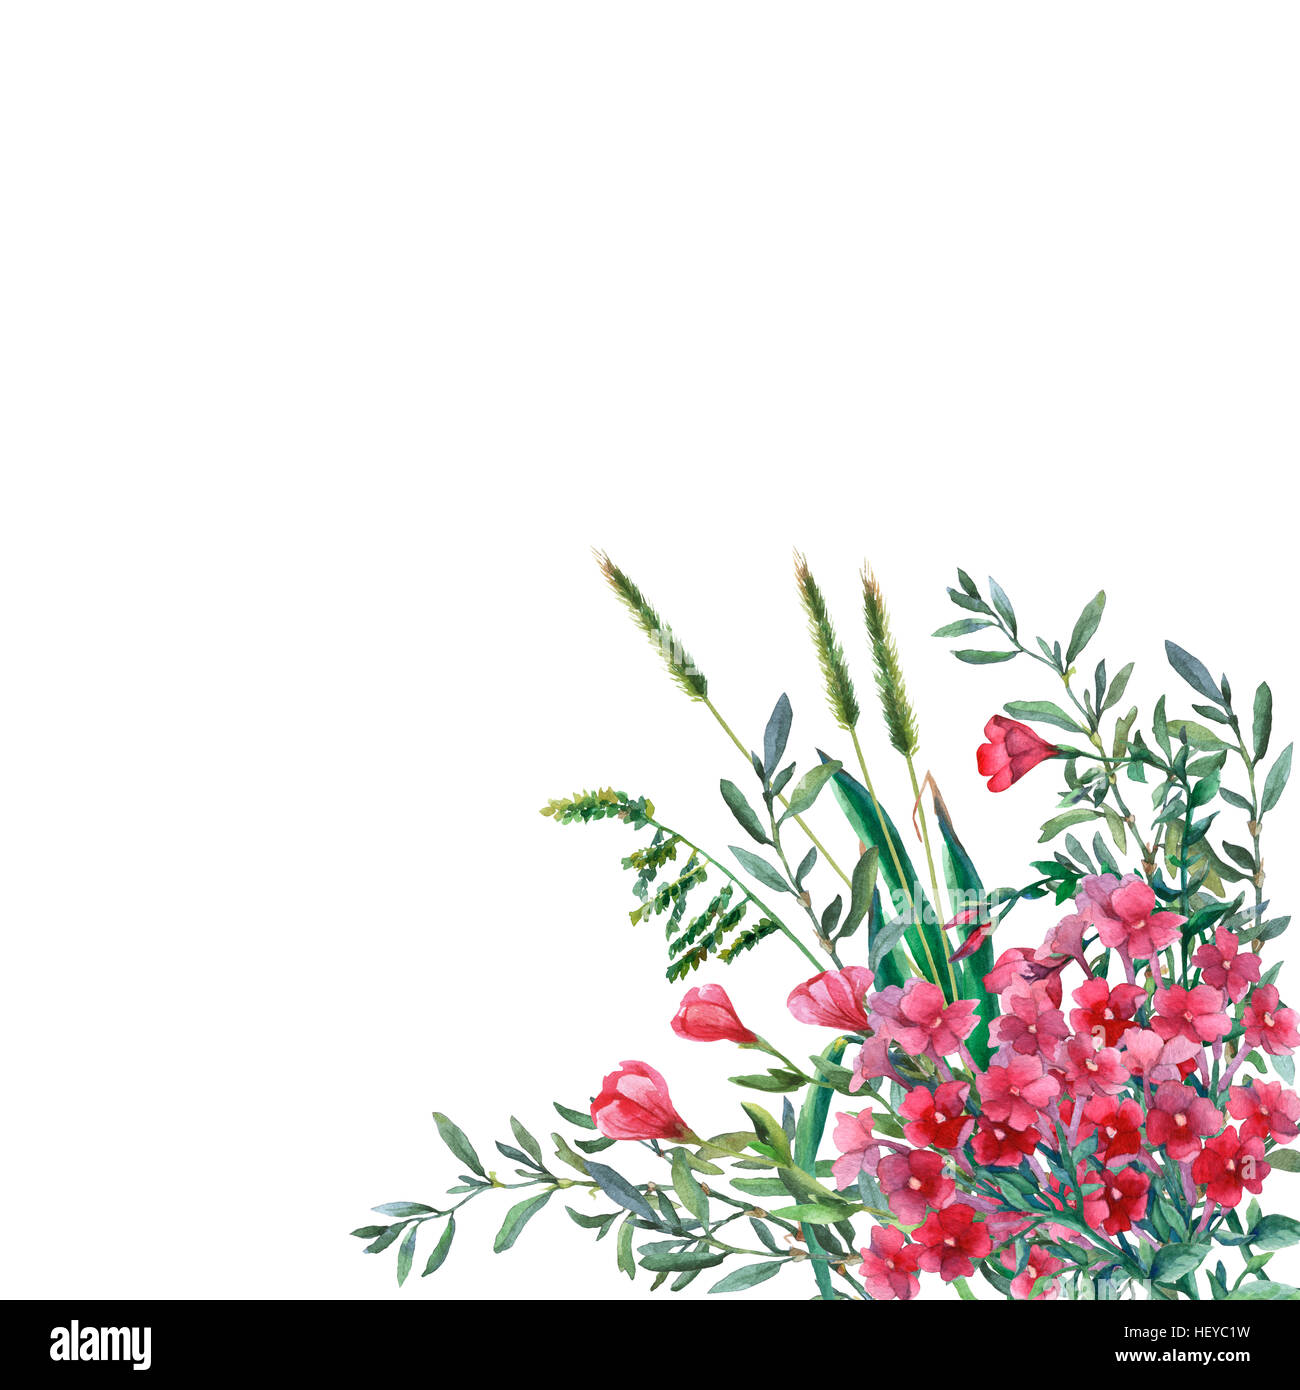 Colorful spring flowers and grass on a meadow. Watercolor hand painting illustration on isolate white background. Stock Photo